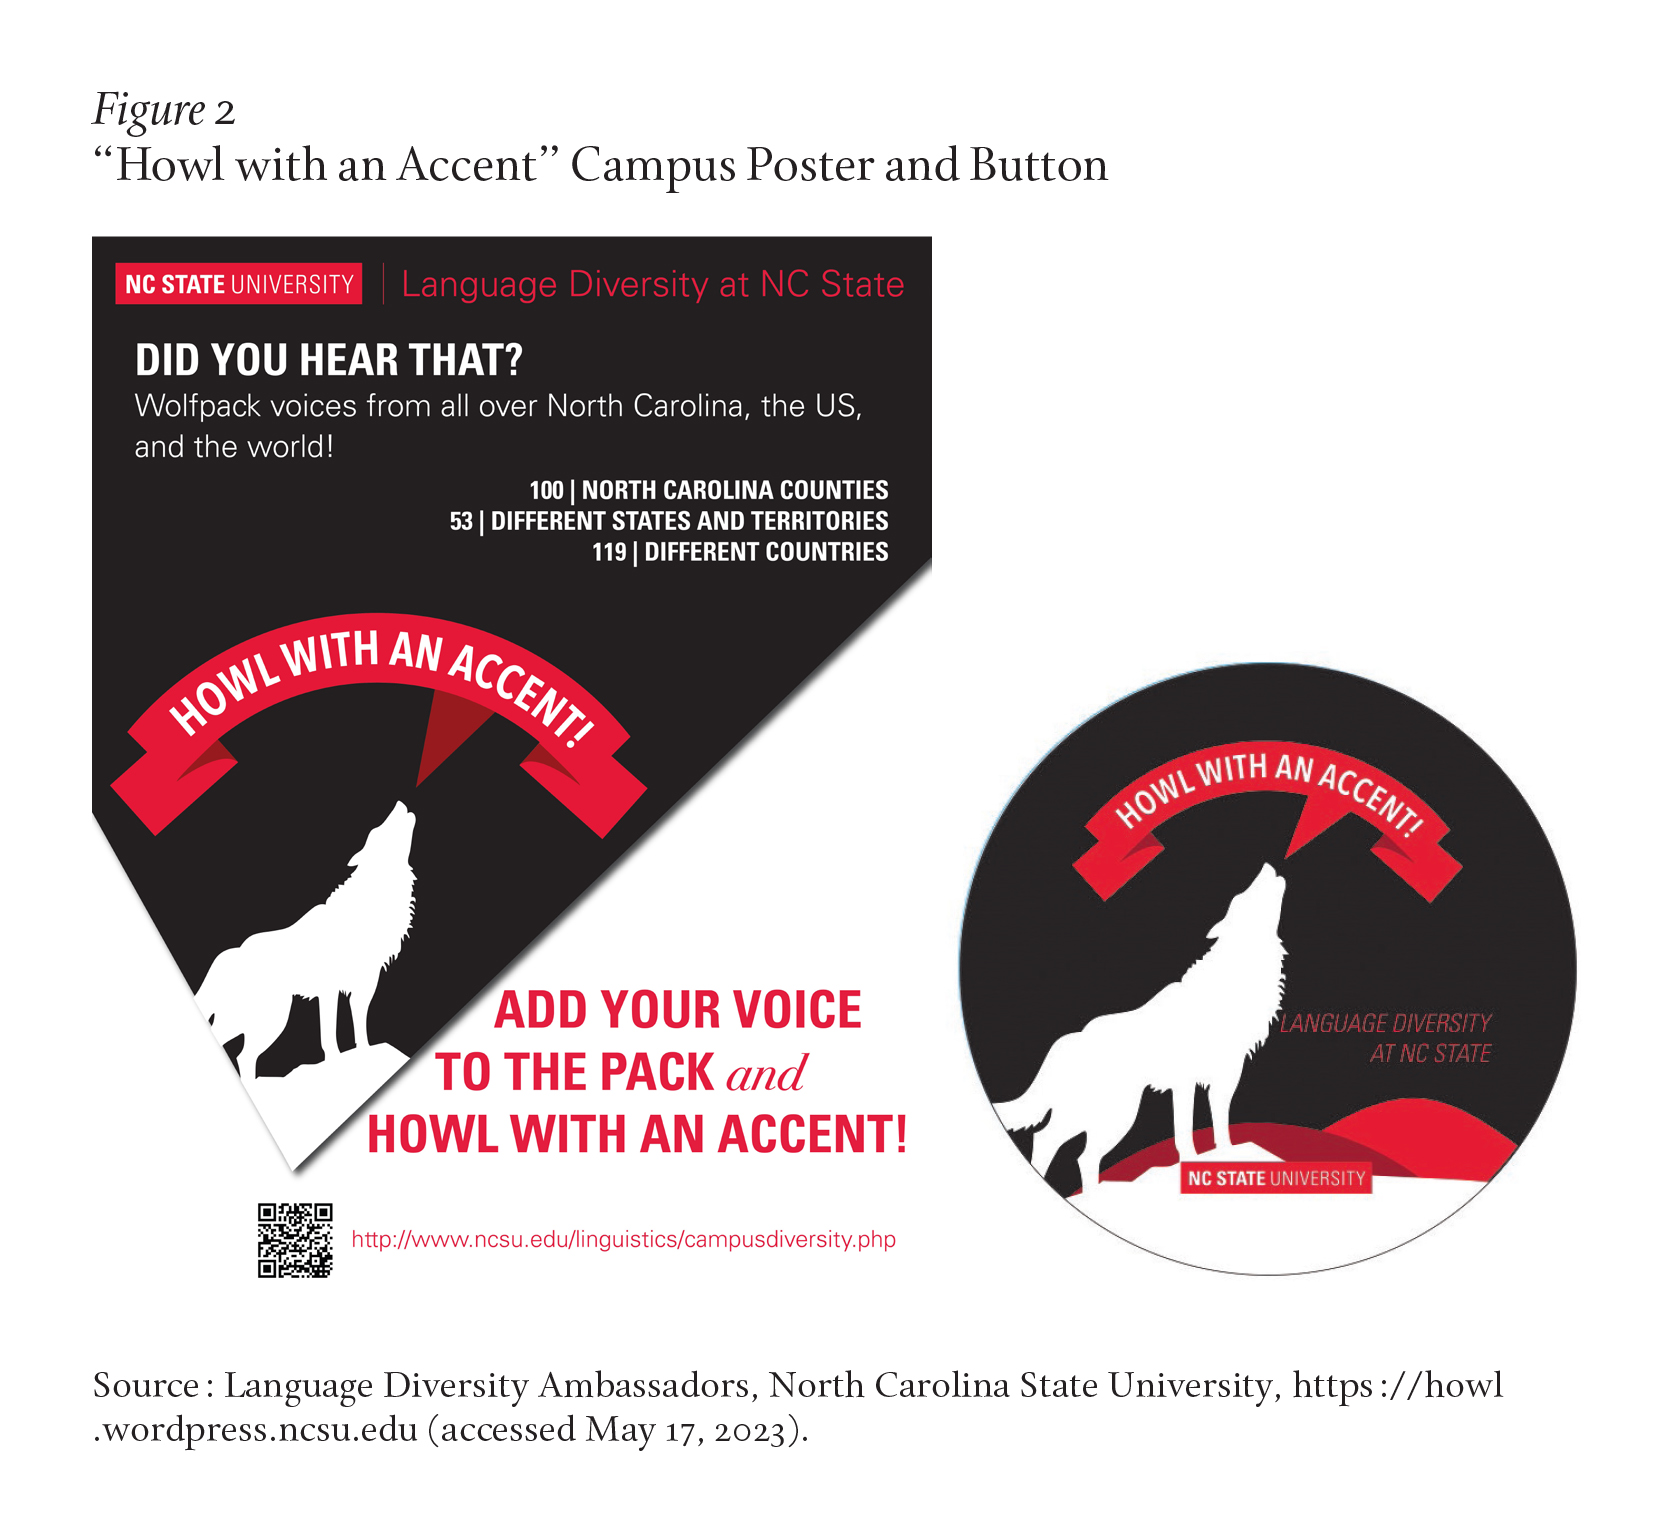 The flyer and button used at North Carolina State University to promote language diversity on campus. The image shows a silhouette of a howling wolf beside a speech bubble that says, "Howl with an accent!" Other text on the flyer: Language Diversity at NC State, Did you hear that? Wolfpack voices from all over North Carolina, the U.S., and the world! 100 North Carolina Counties, 53 different states and territories, 119 different countries. Add your voice to the pack and howl with an accent!